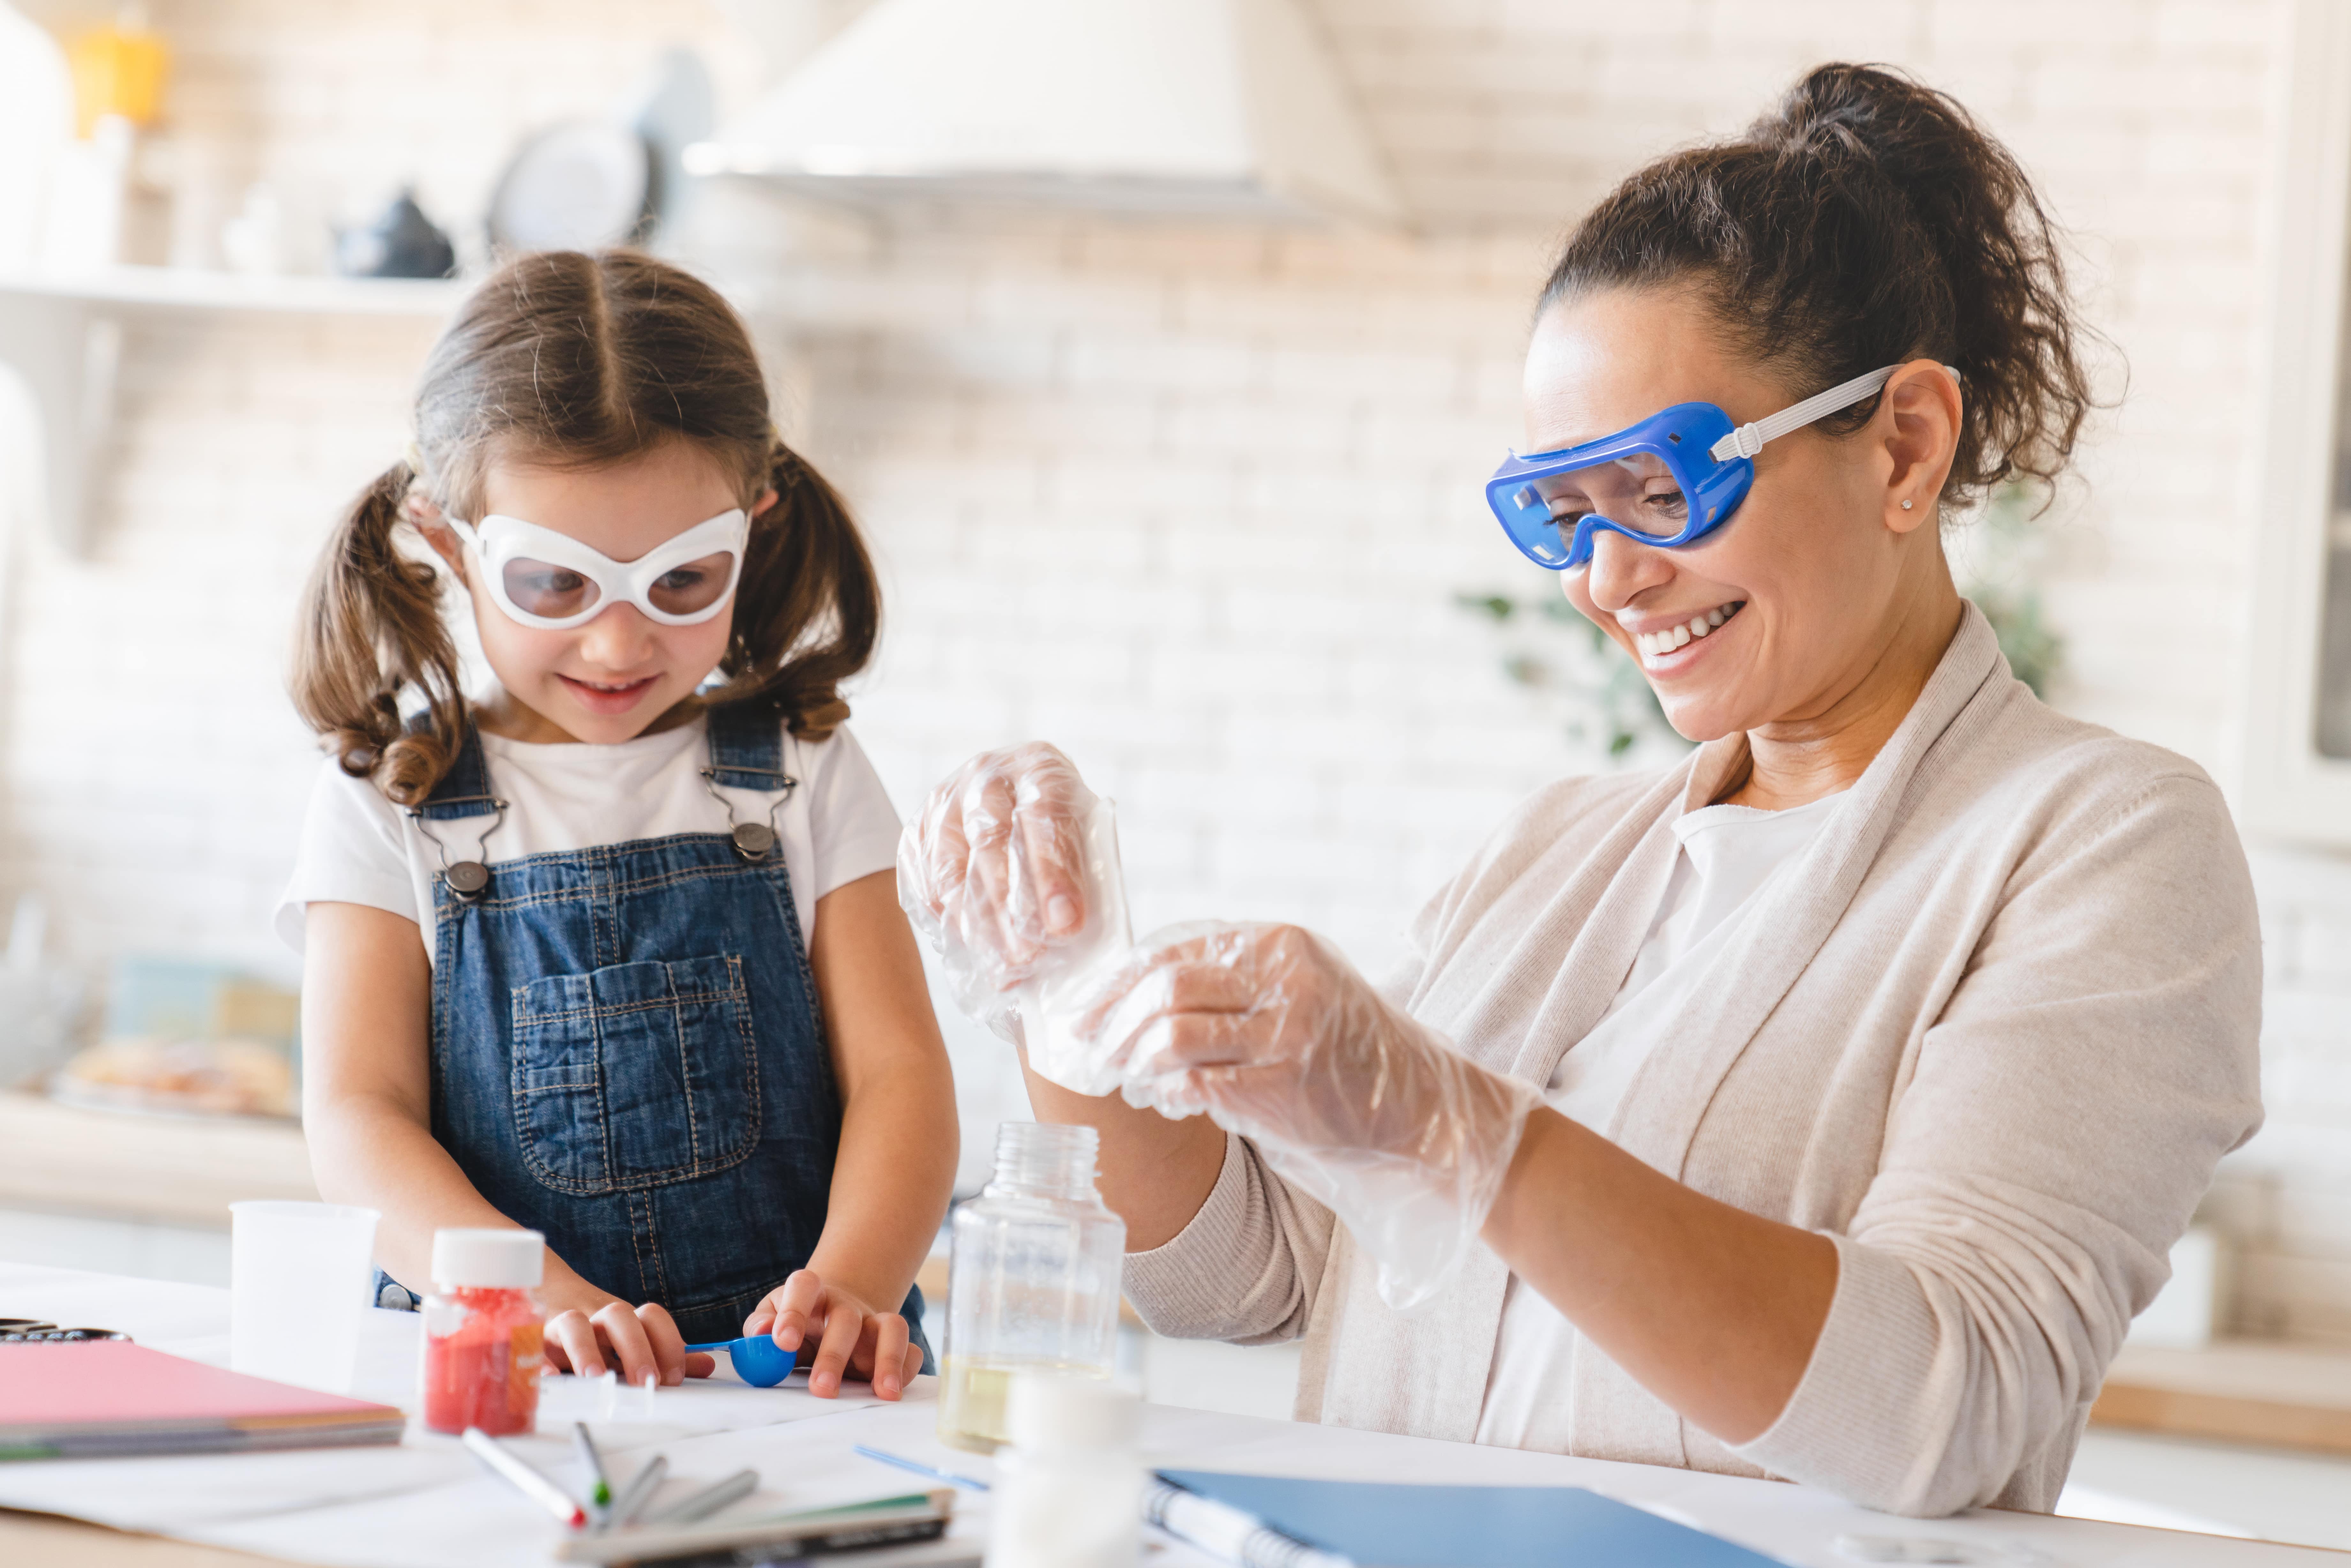 A mum and daughter wearing safety goggles and gloves while conducting science experiments at home.